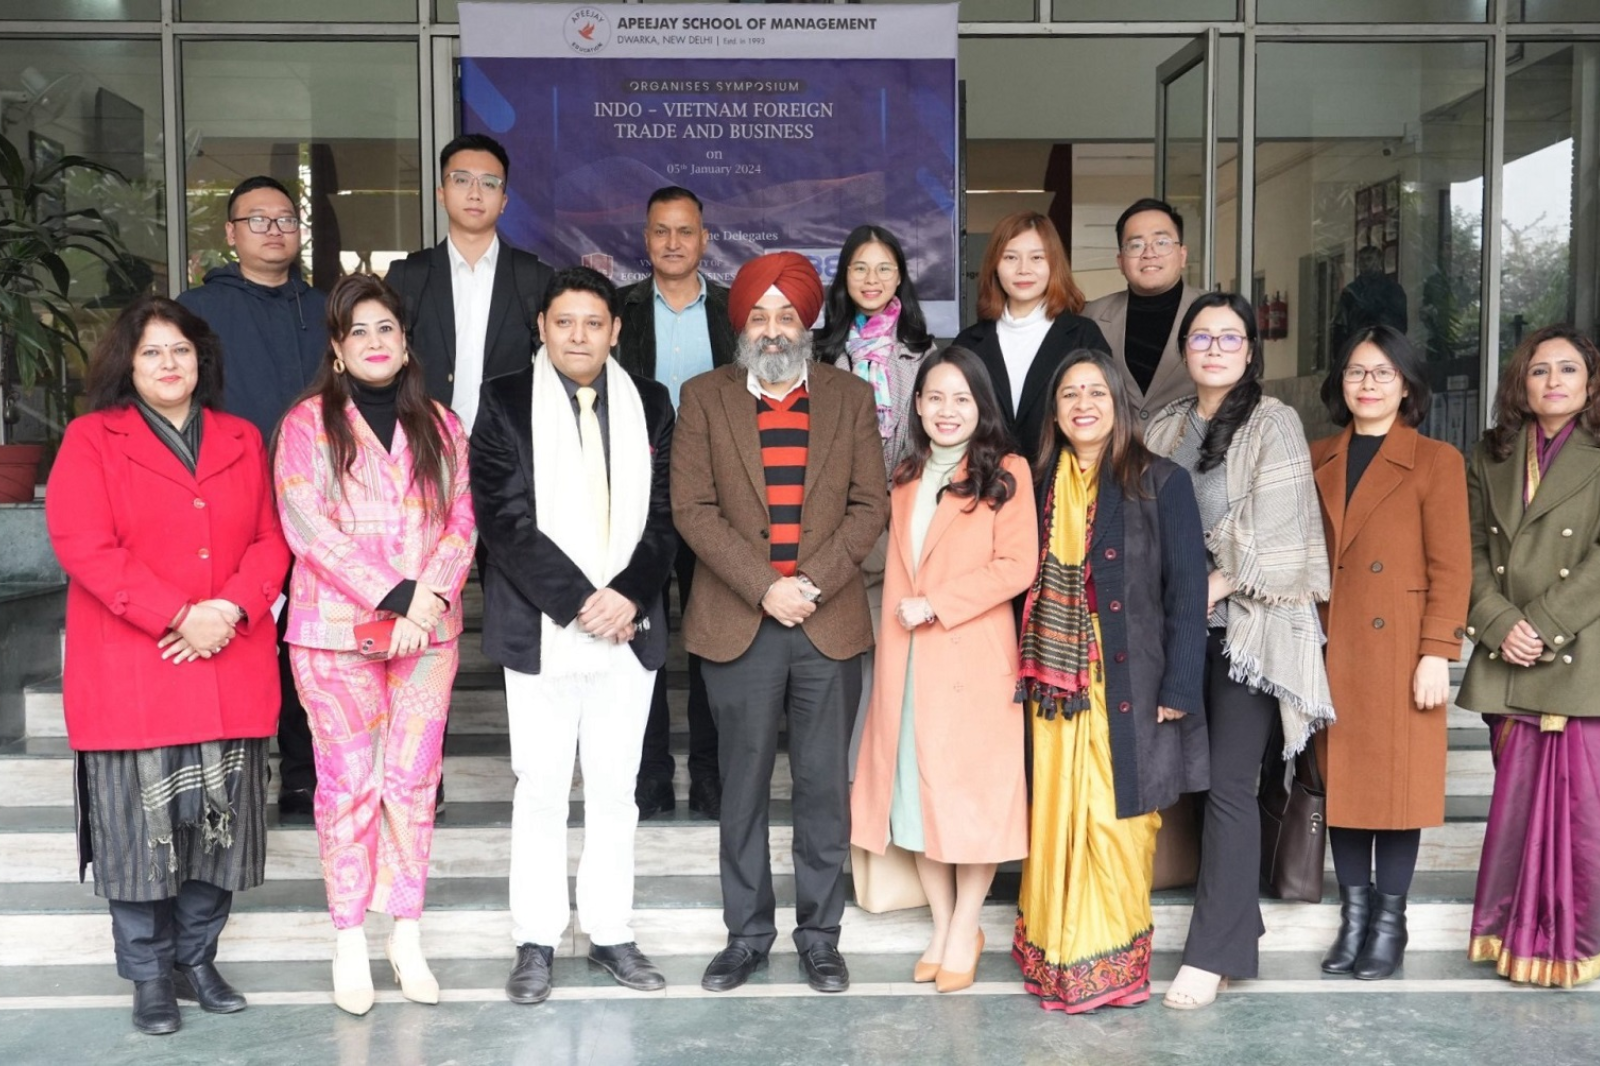 "INDIA trip" - The journey of connecting and expanding UEB's international cooperation network with Indian partners